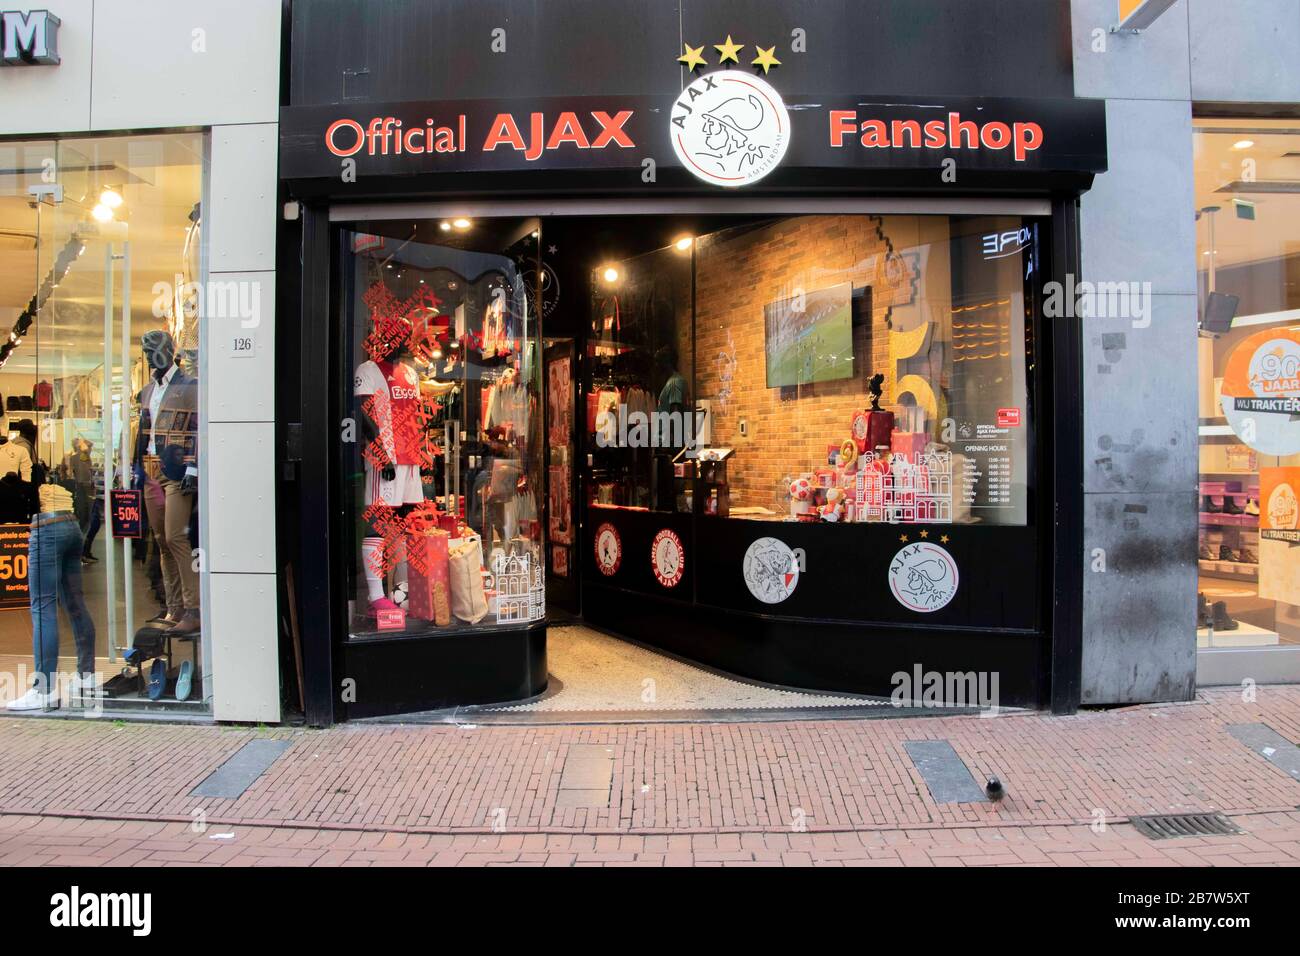 Official Ajax Fan Shop At Amsterdam The Netherlands 2019 Stock Photo Alamy